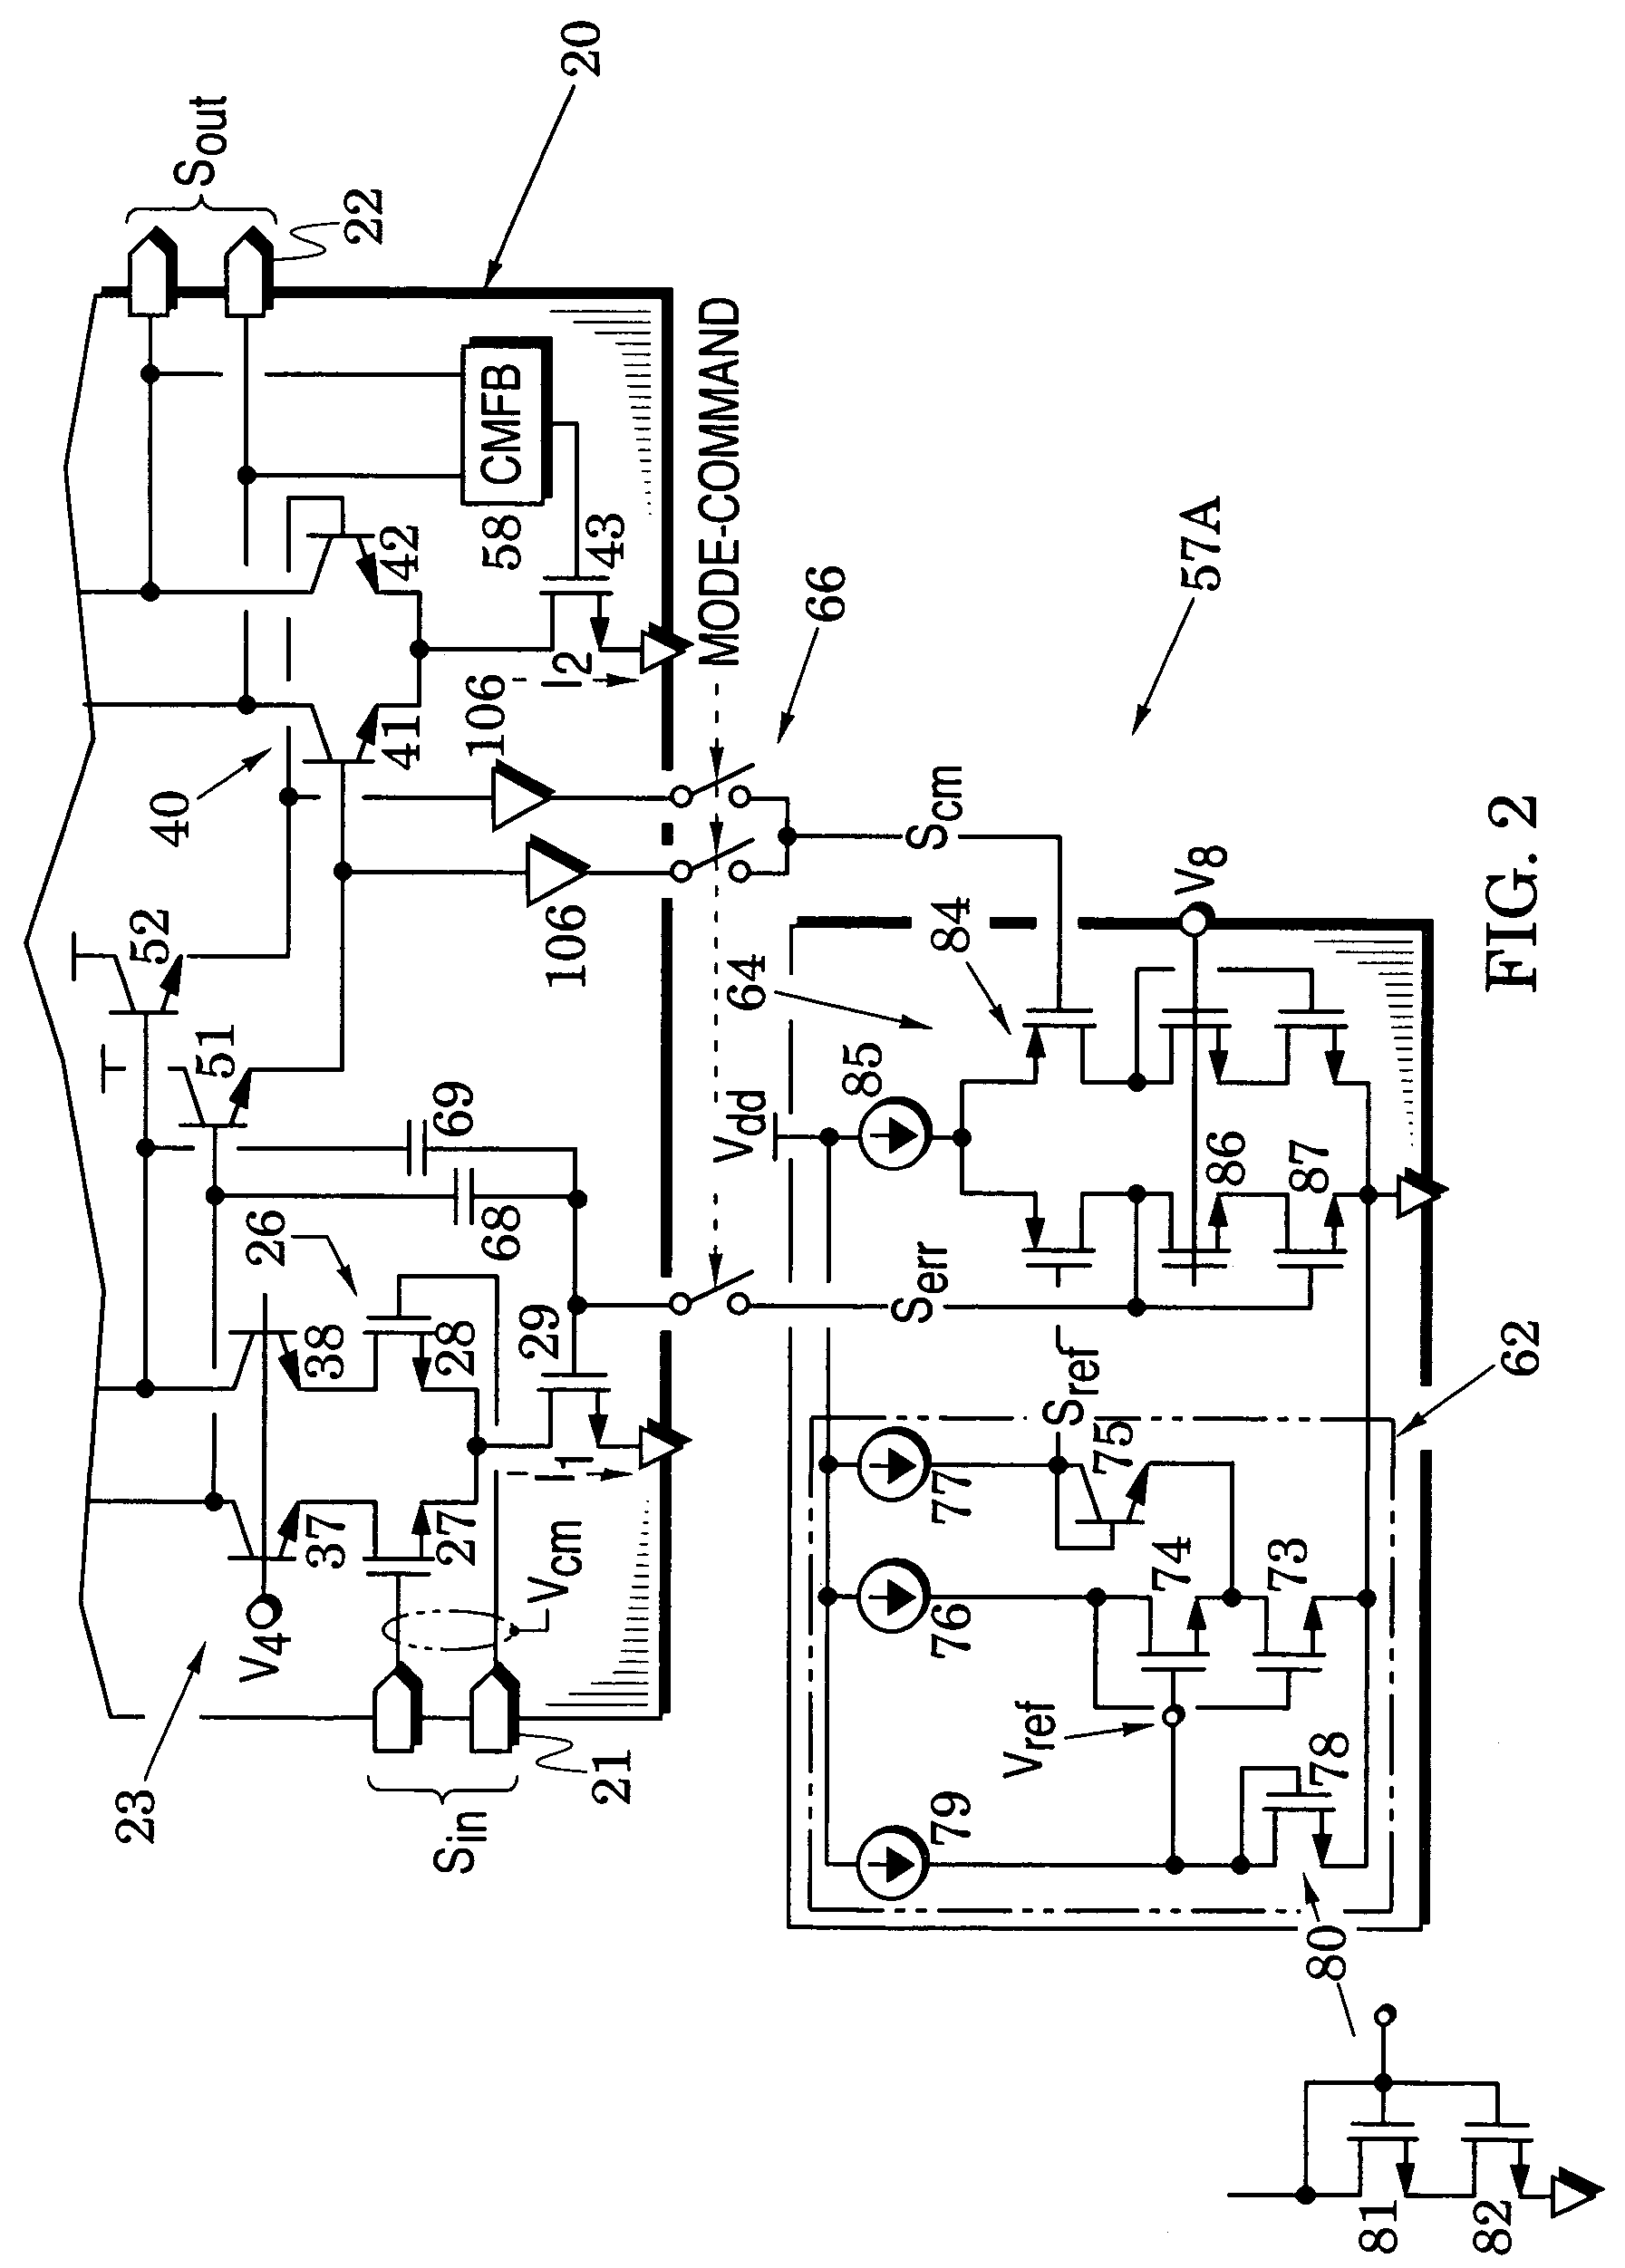 Differential amplifiers with enhanced gain and dynamic range